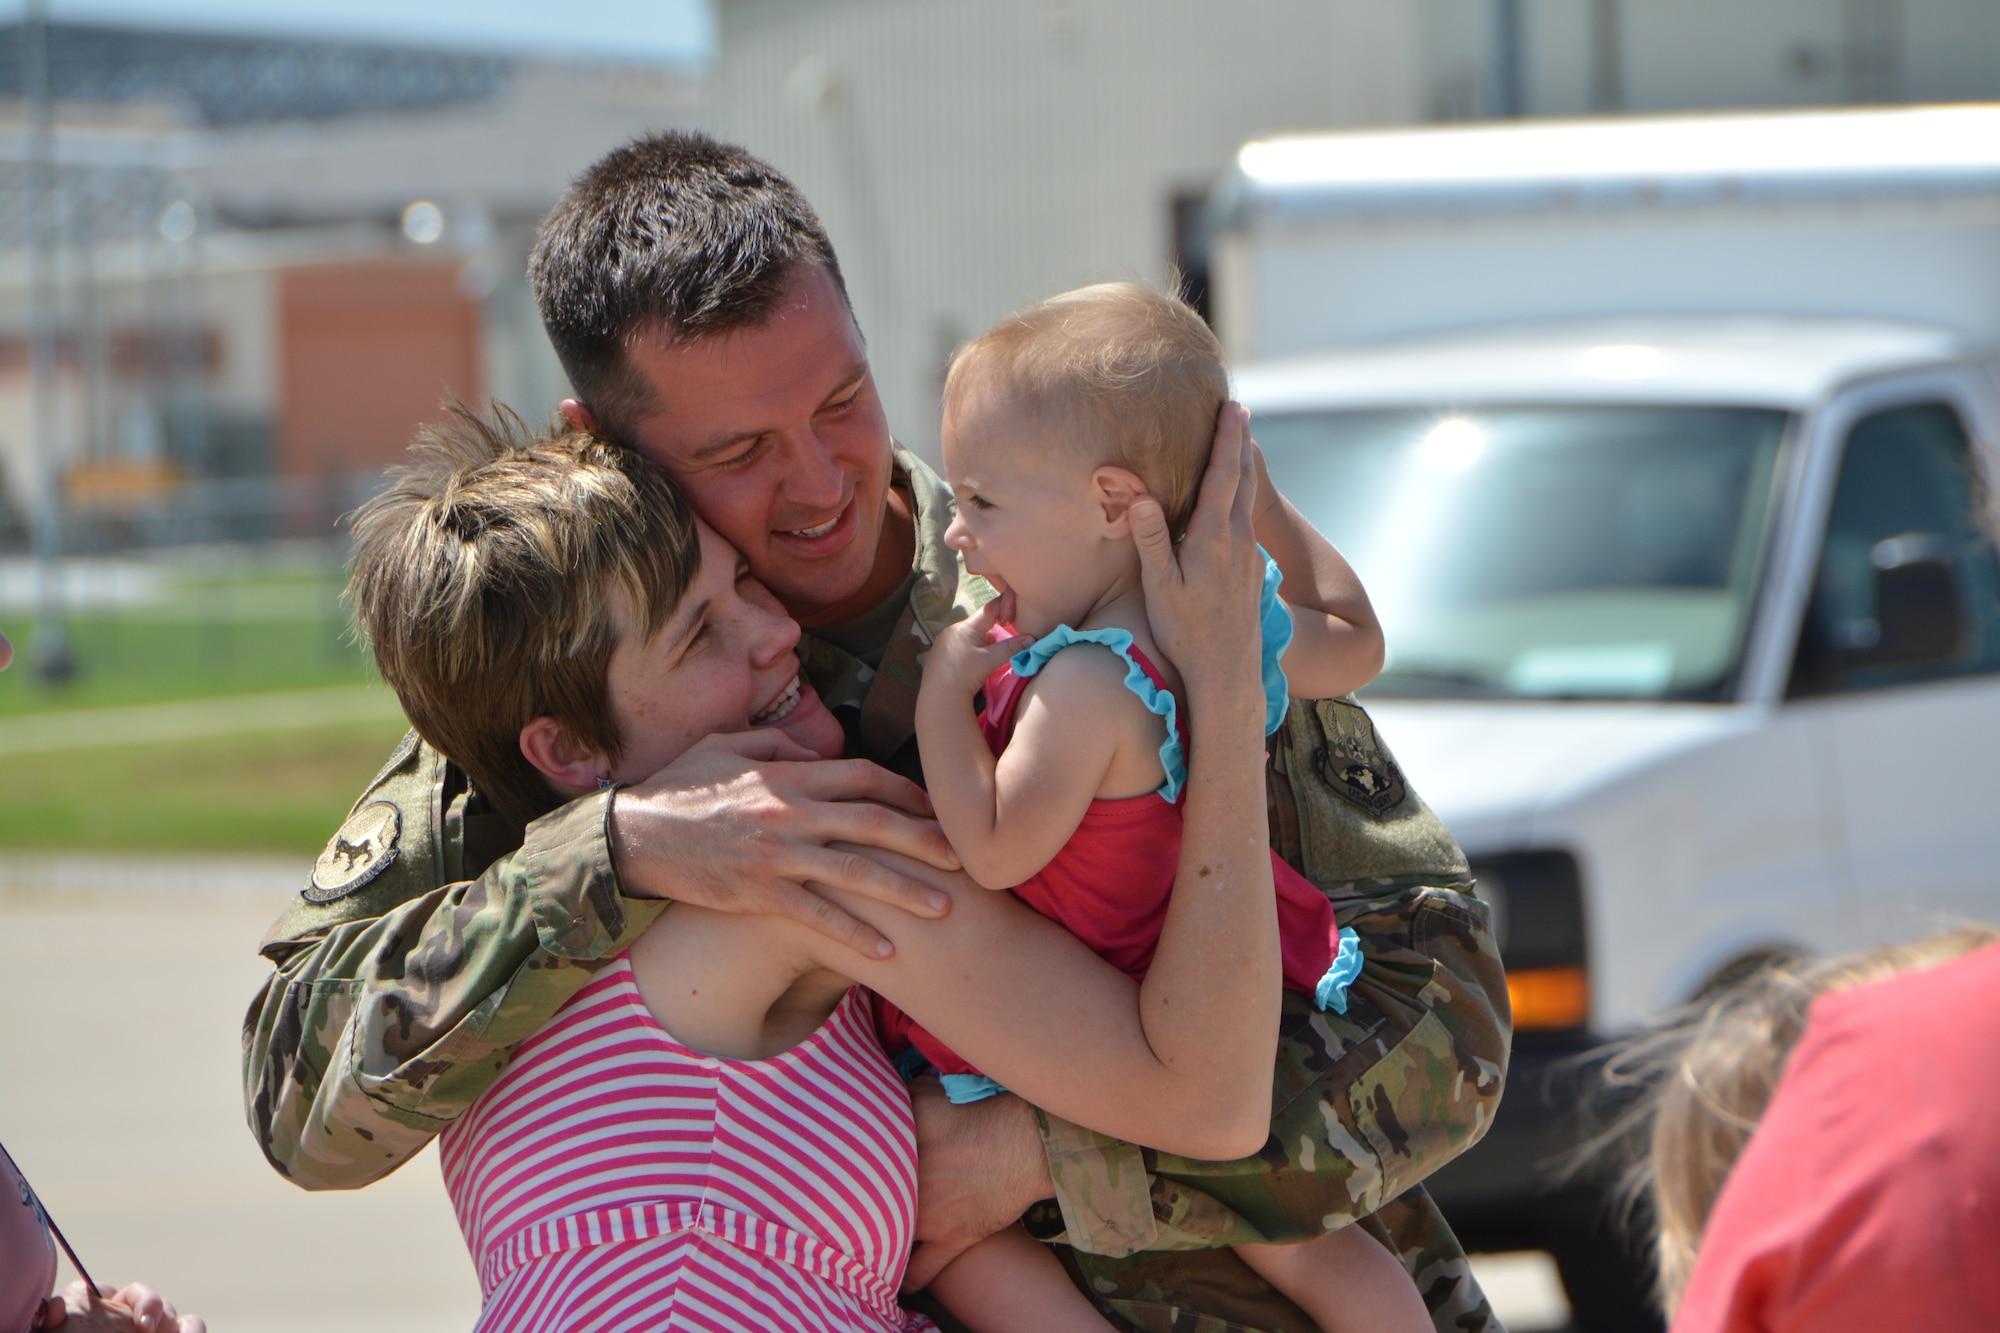 Staff Sgt. Noah Garris, a combat crew communications technician with the 507th Operations Support Squadron at Tinker Air Force Base, Okla., embraces his family following a deployment July 3, 2018. More than 100 Reserve Citizen Airmen from the 507th Air Refueling Wing at Tinker AFB deployed to Incirlik Air Base, Turkey, in support of air operations. (U.S. Air Force photo by Tech. Sgt. Samantha Mathison)